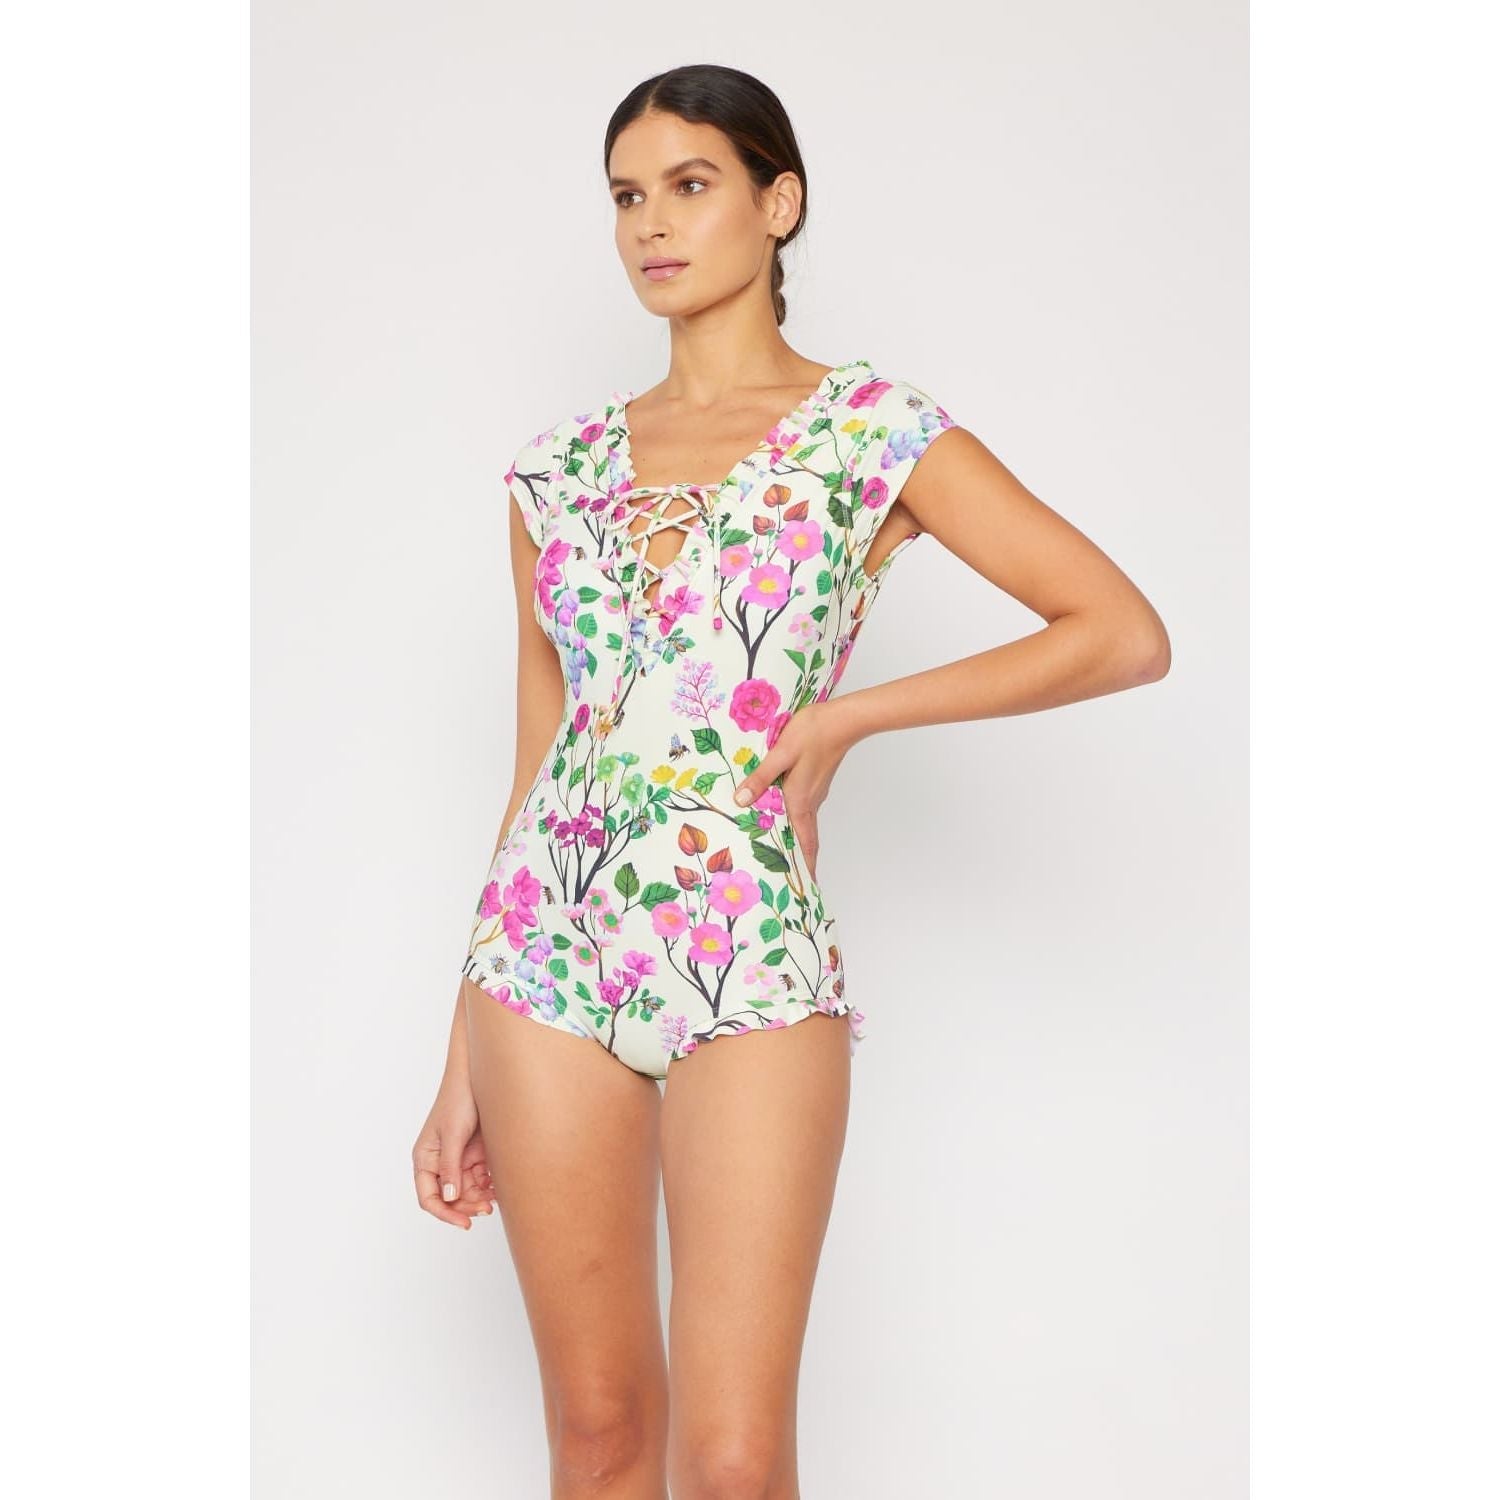 Marina West Swim Bring Me Flowers V-Neck One Piece Swimsuit Cherry Blossom Cream - KME means the very best